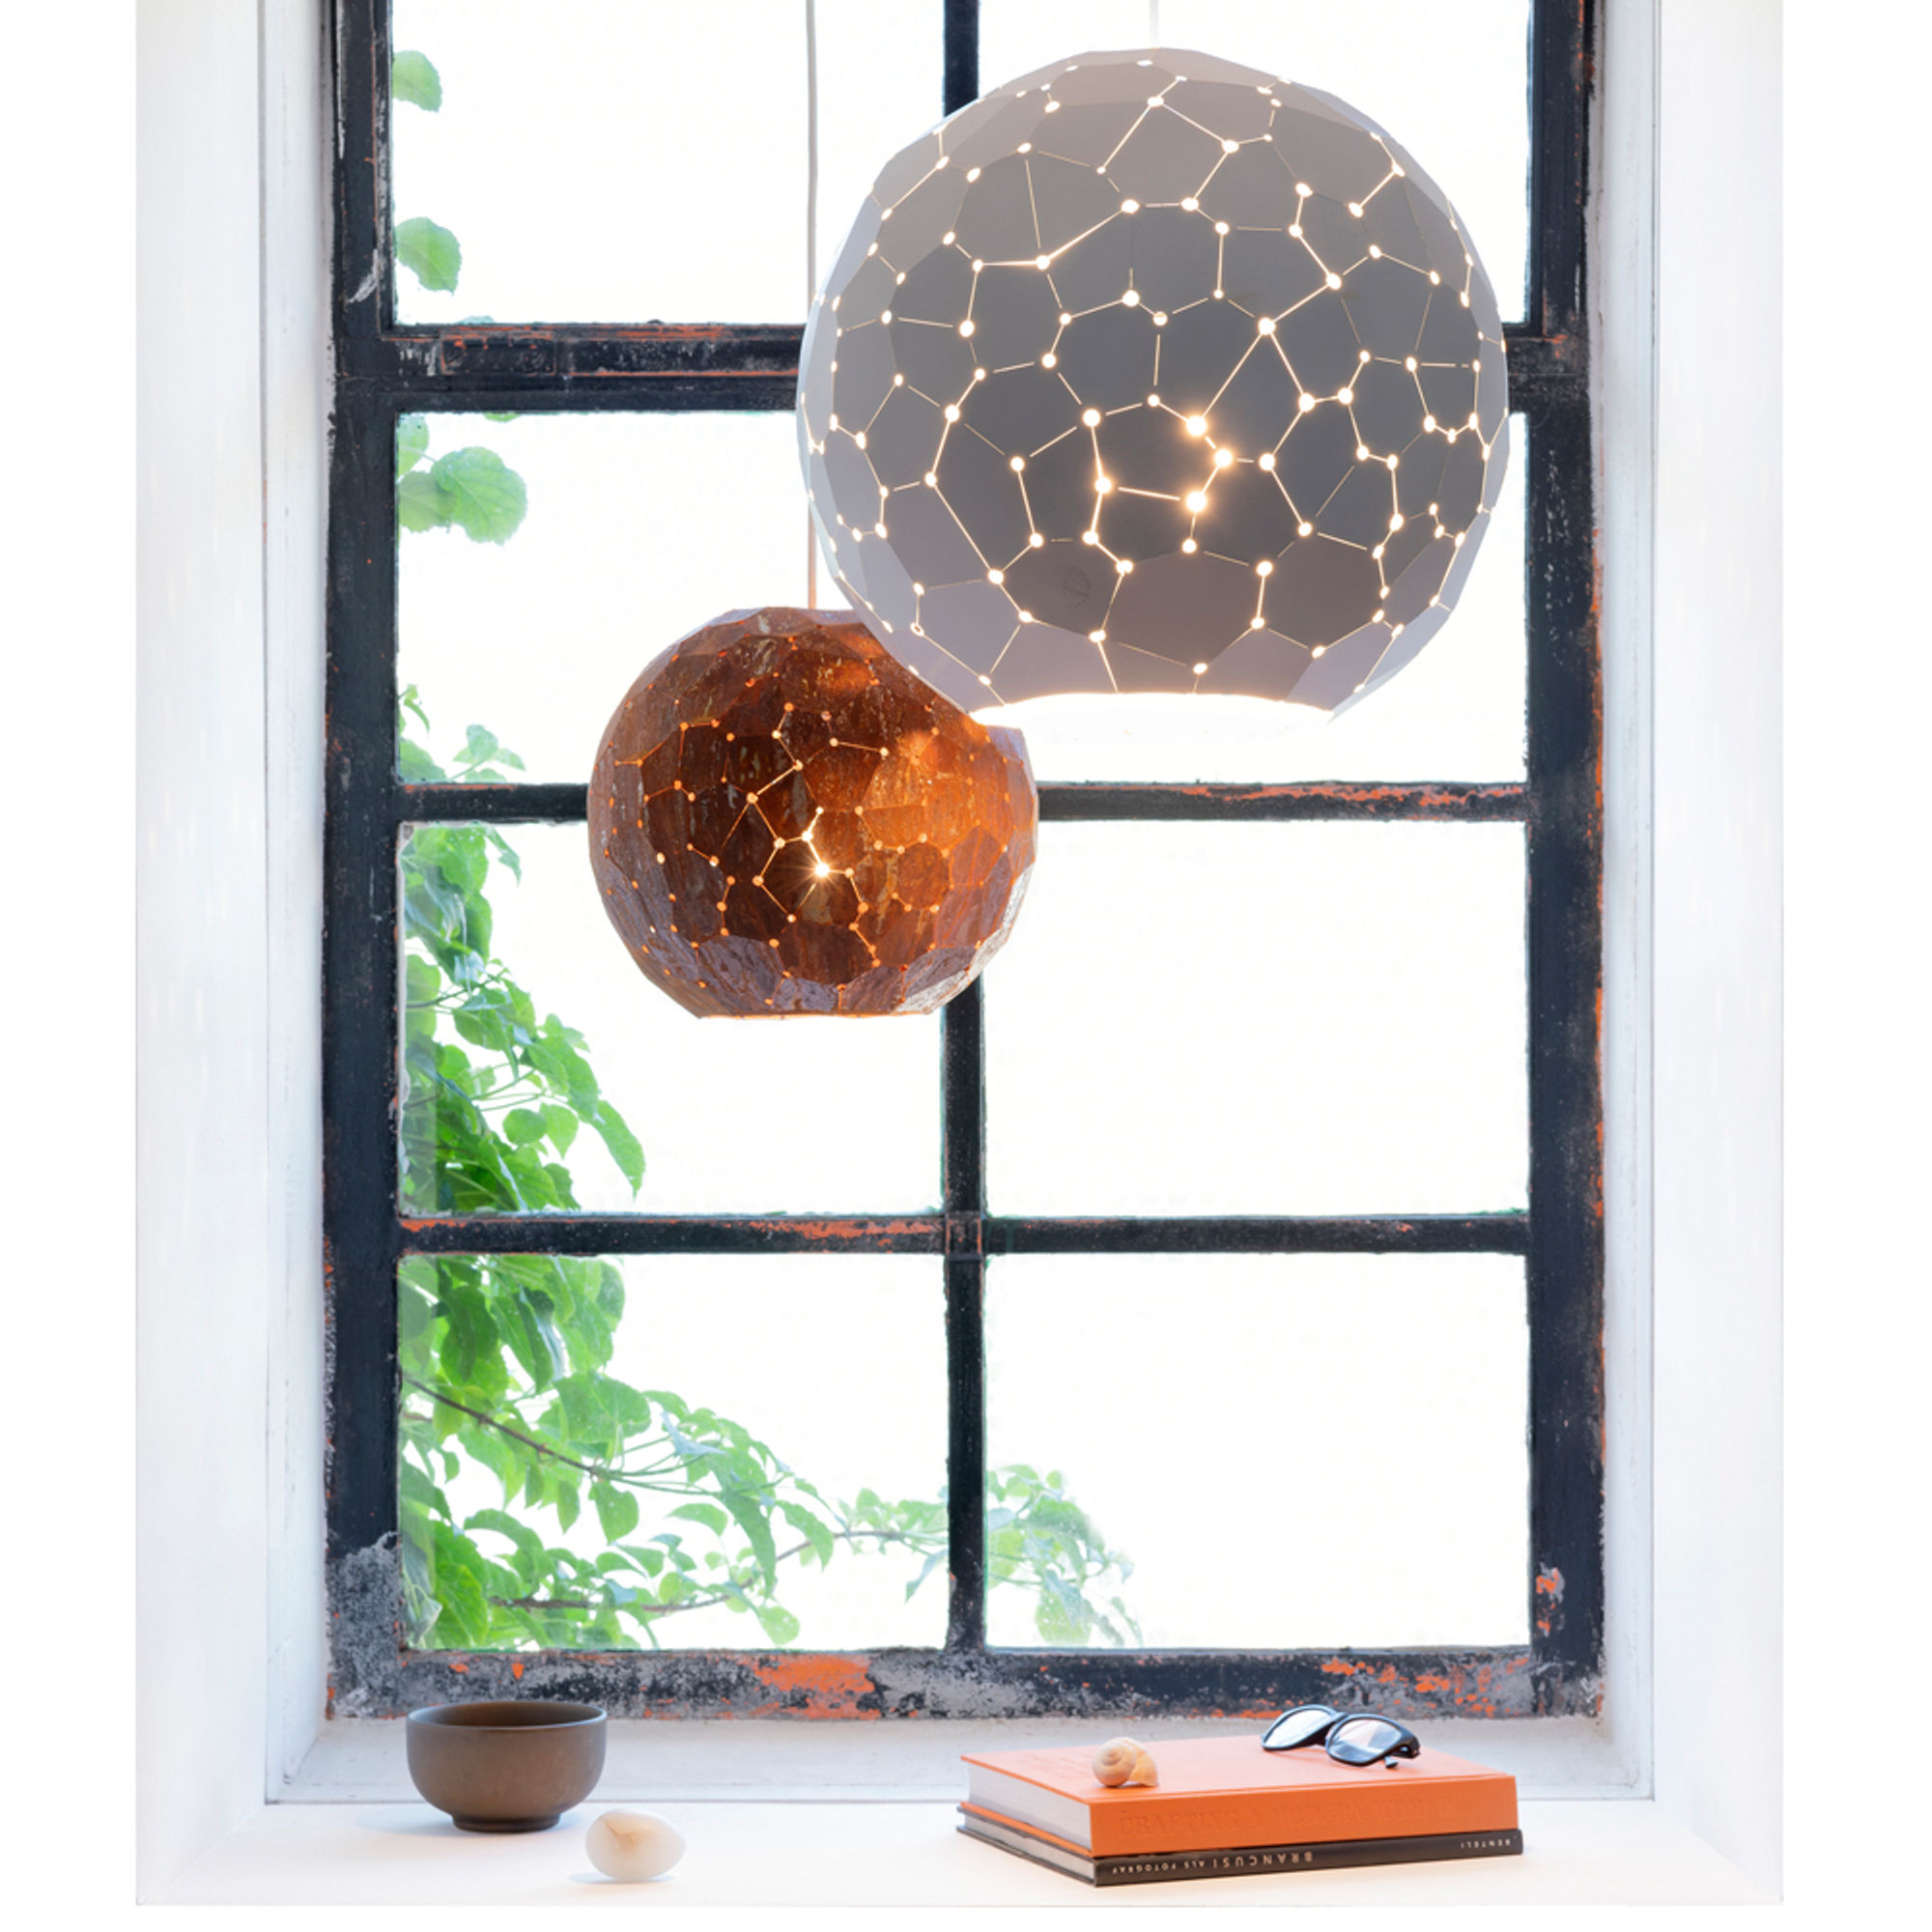 The StarDust 40 Pendant by By Marc de Groot 1